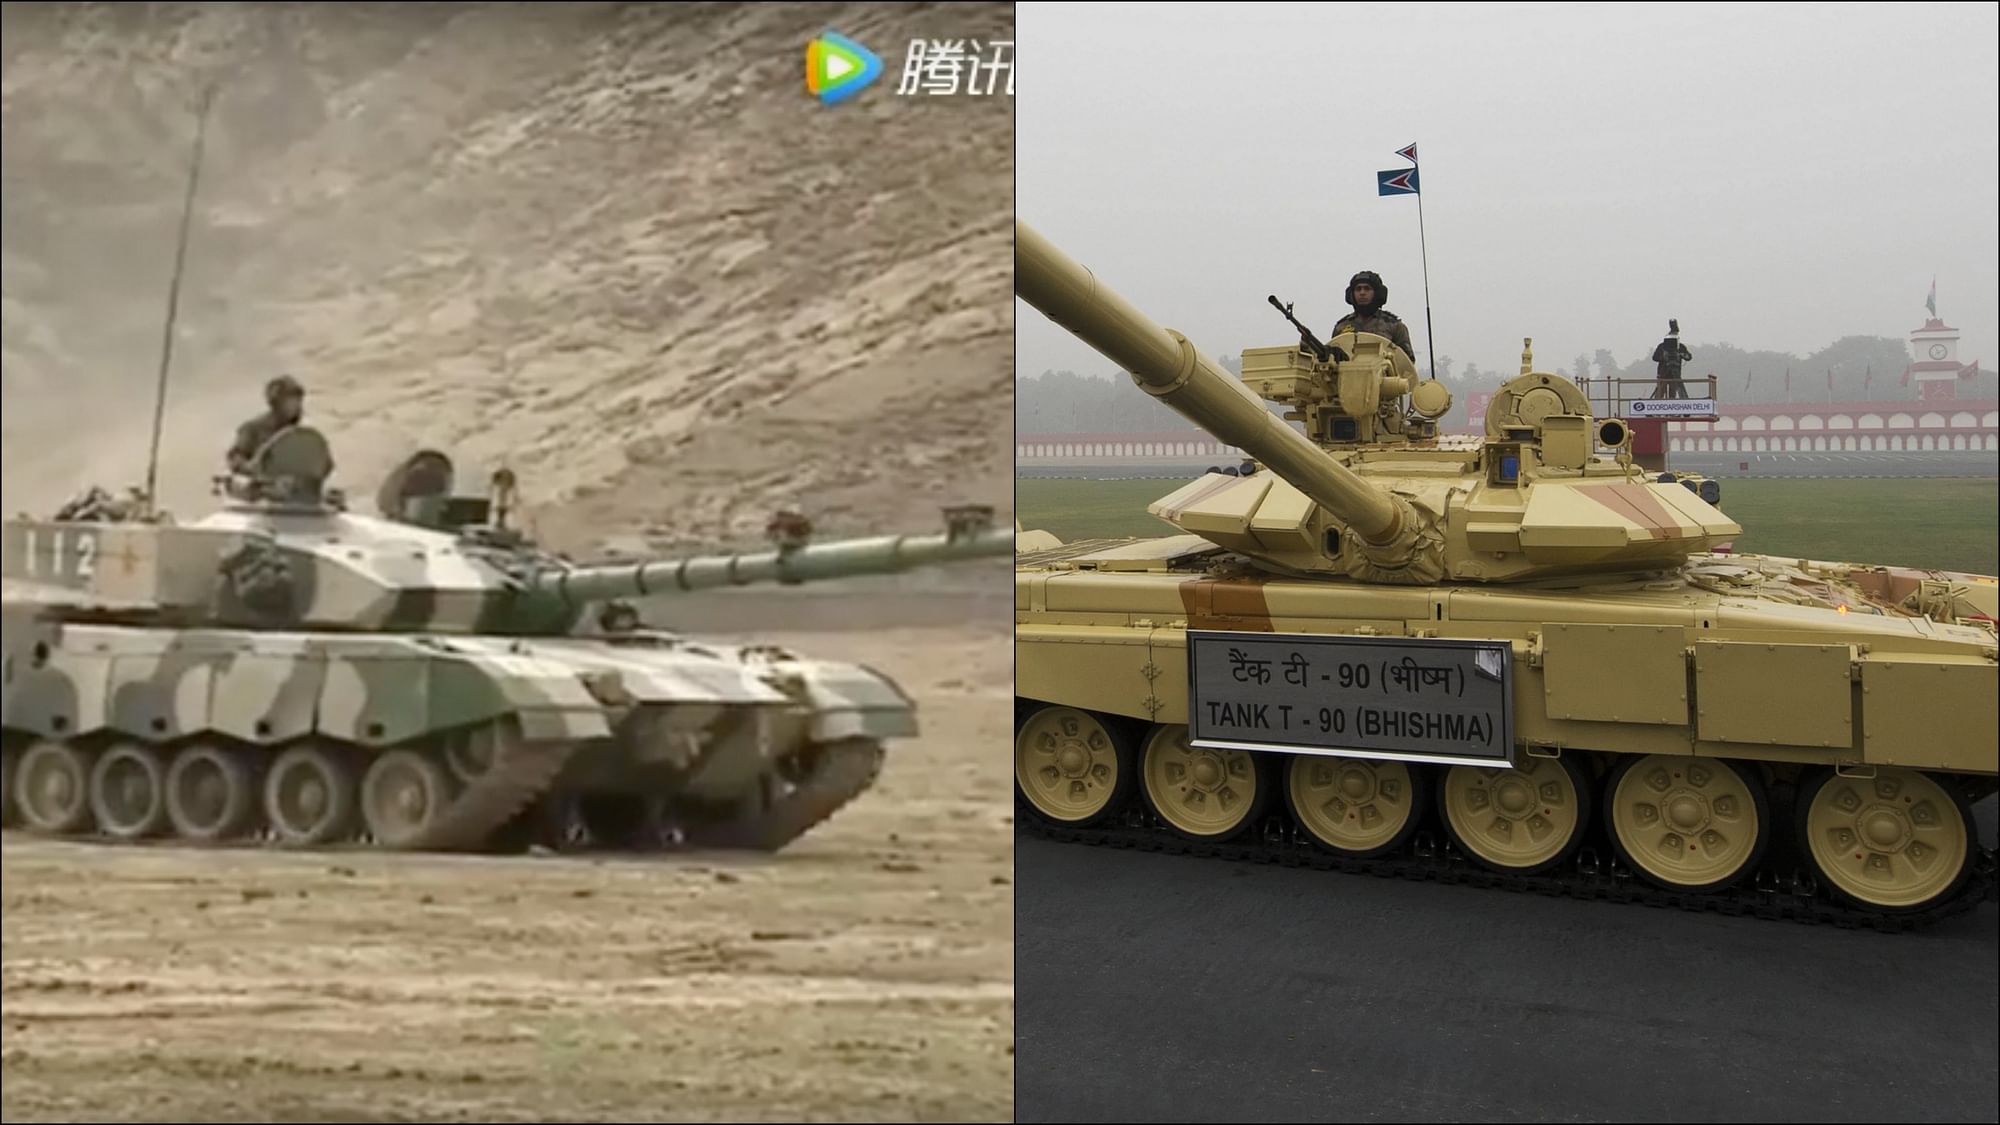 The new Chinese tank (Left) and India’s MBT T-90 (Right).&nbsp;